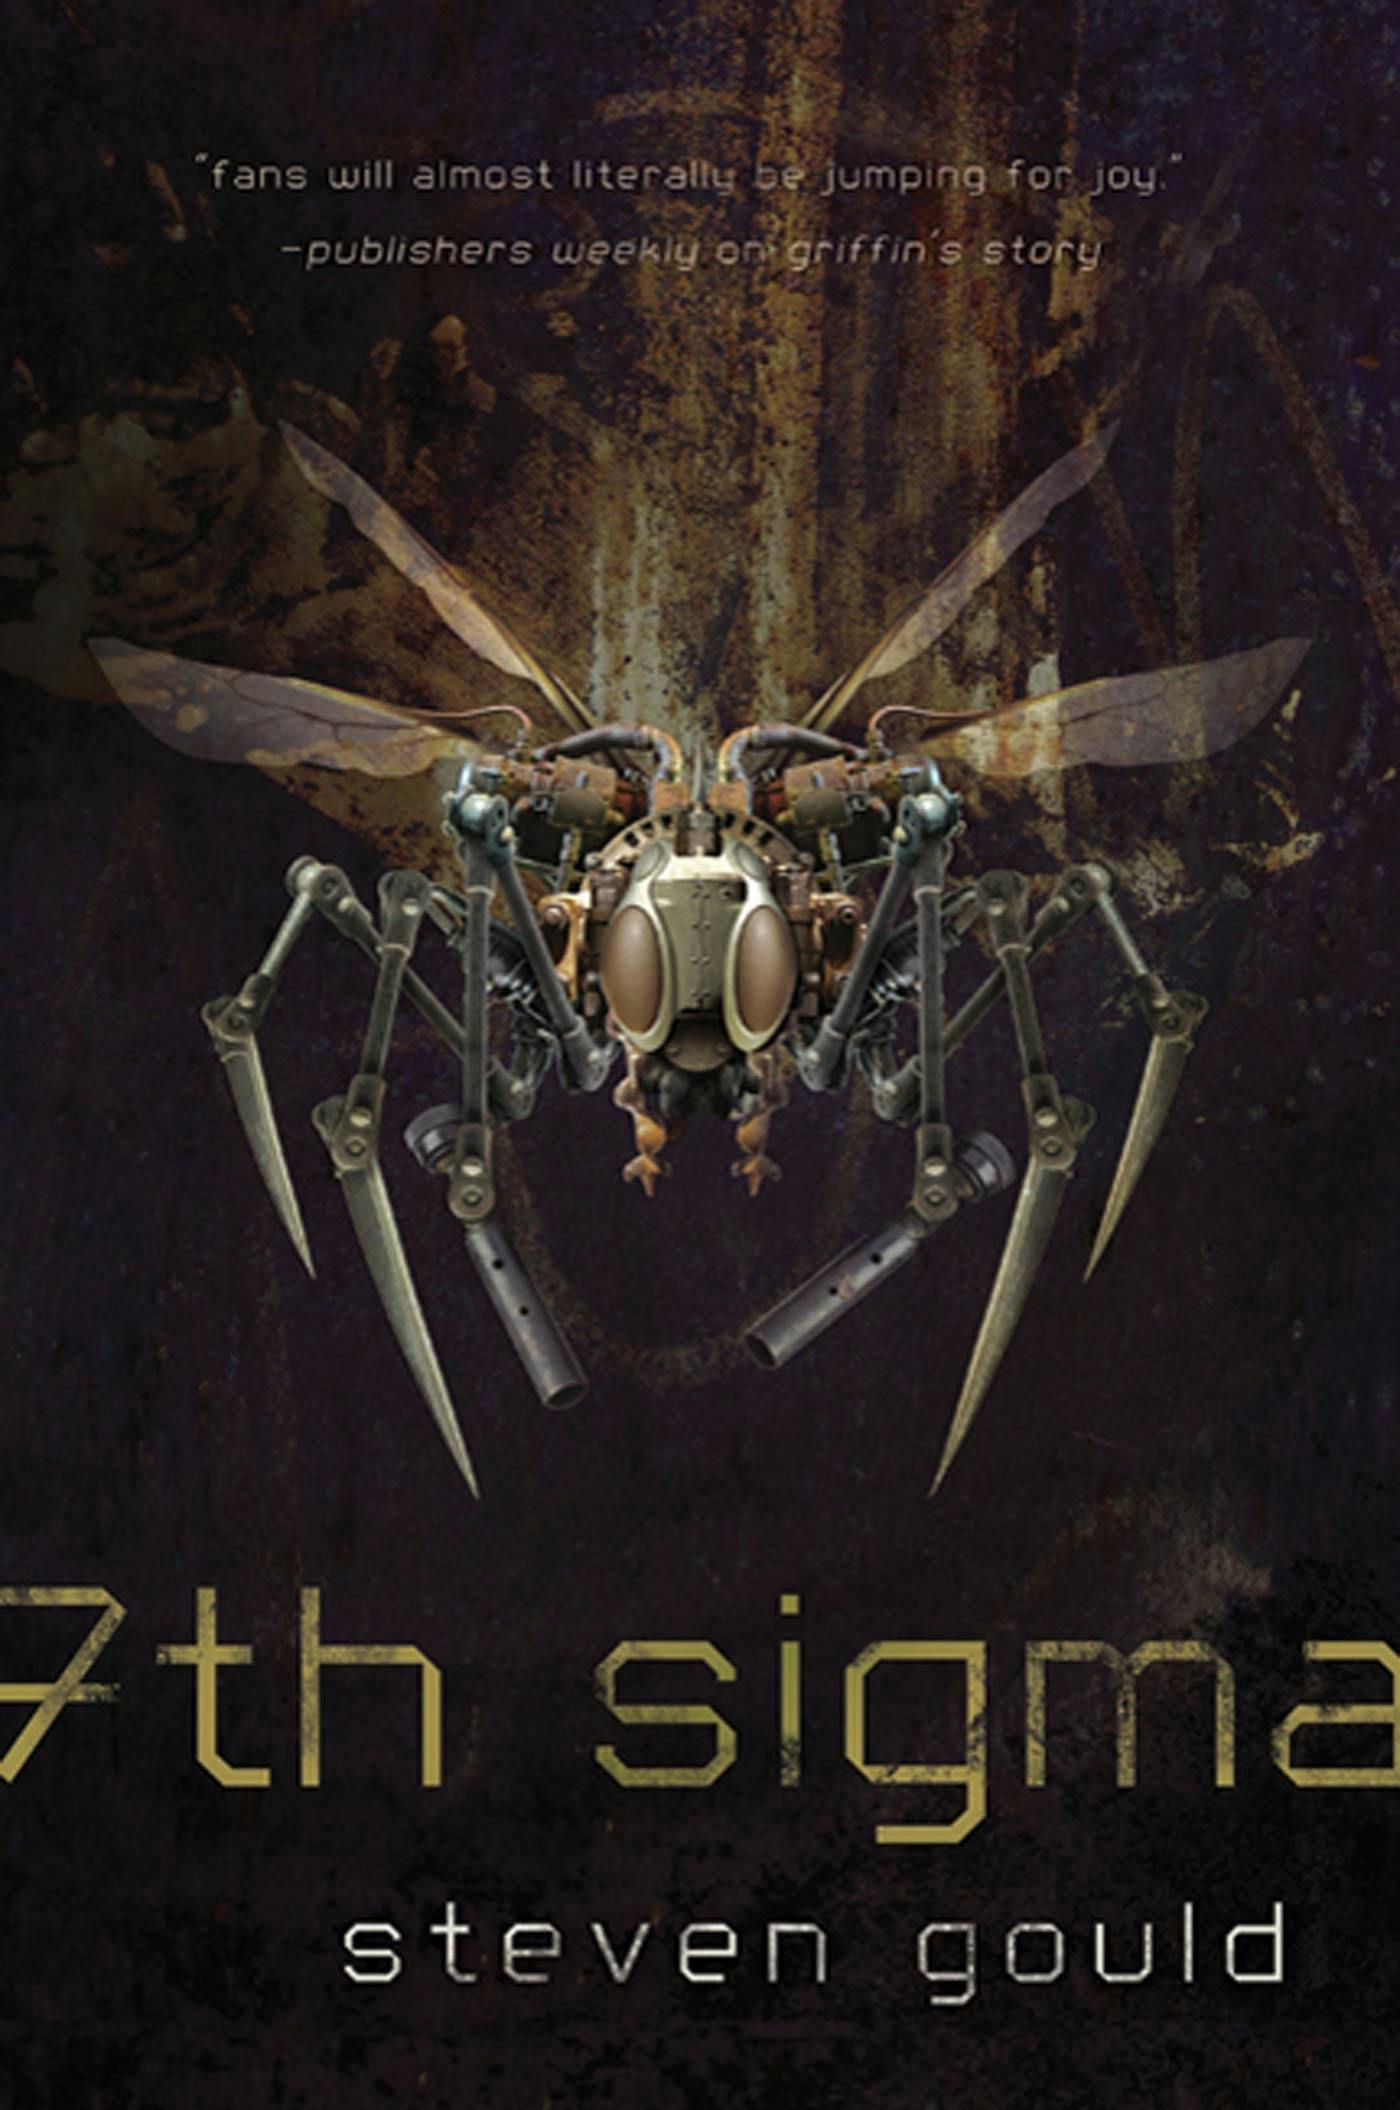 Cover for the book titled as: 7th Sigma